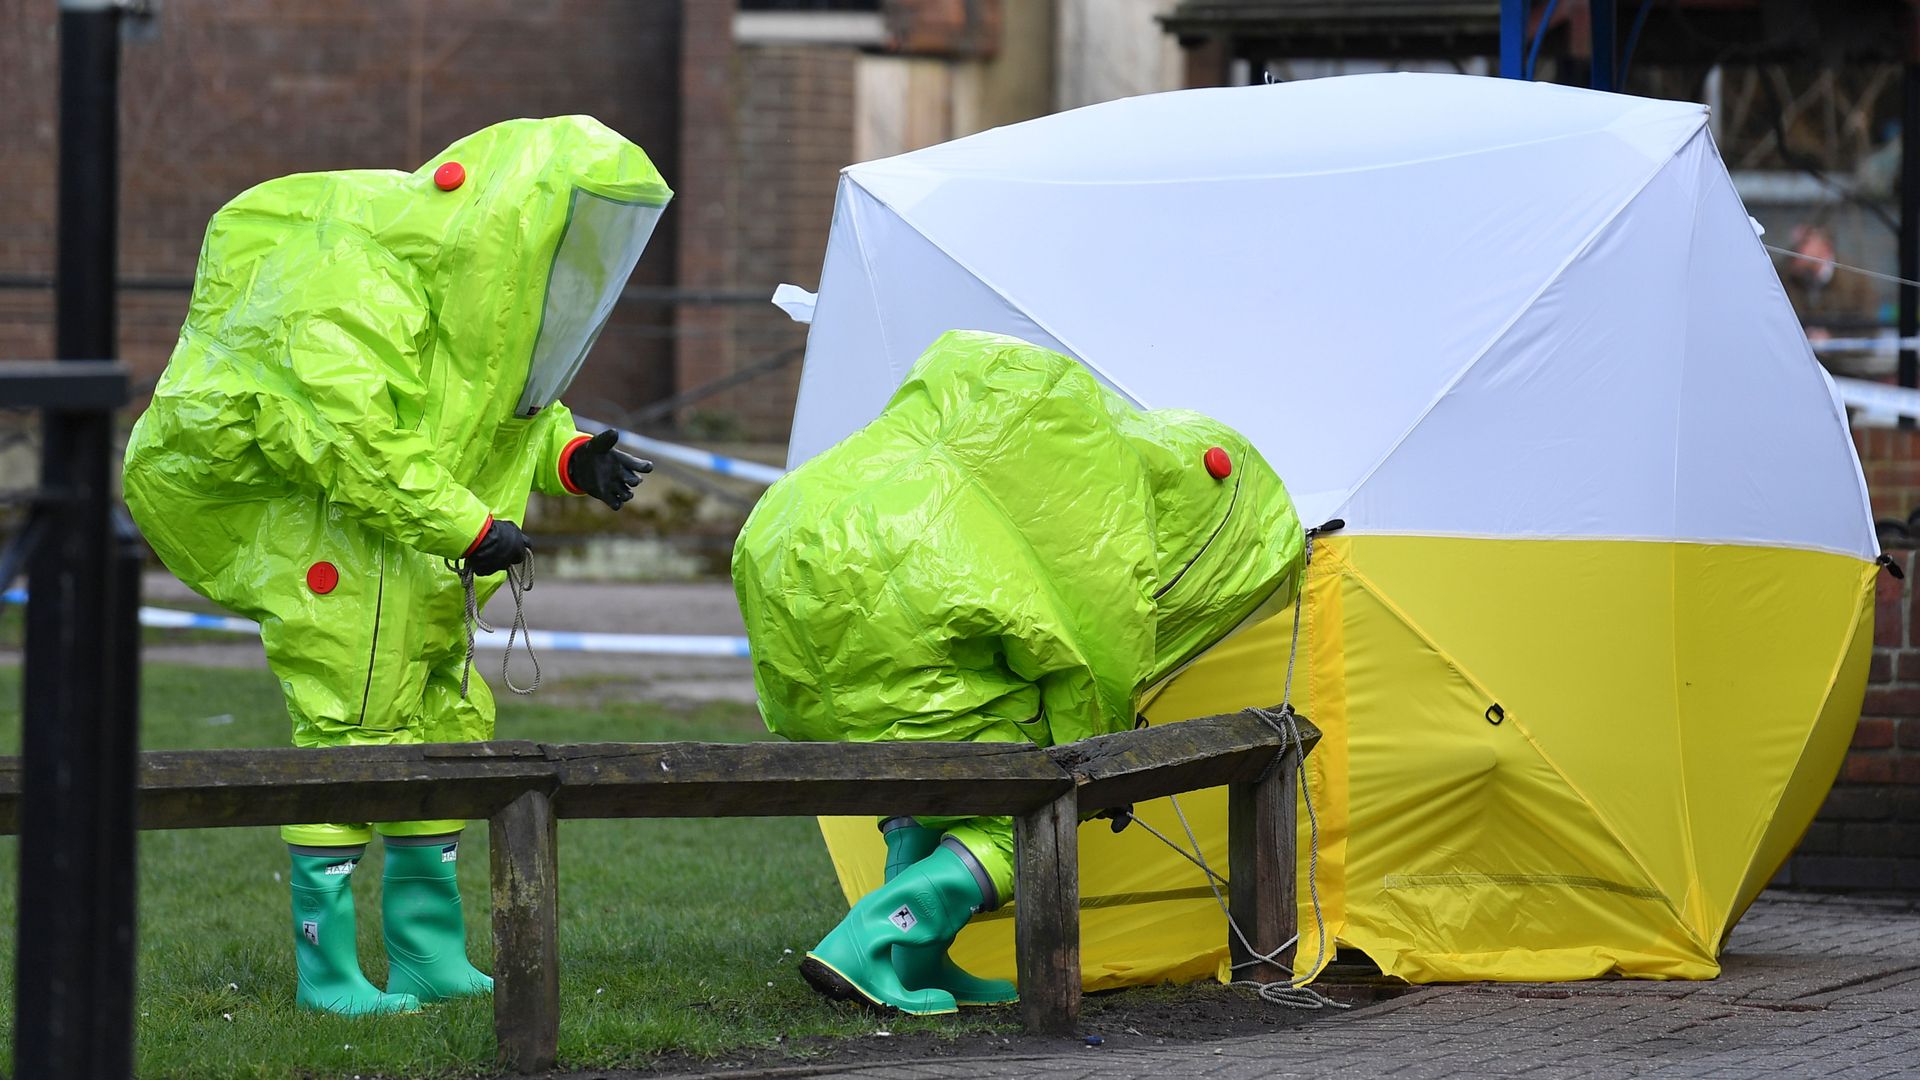 Emergency services members in biohazard encapsulated suits encasing the poisoning scene in a tent in March 2018.